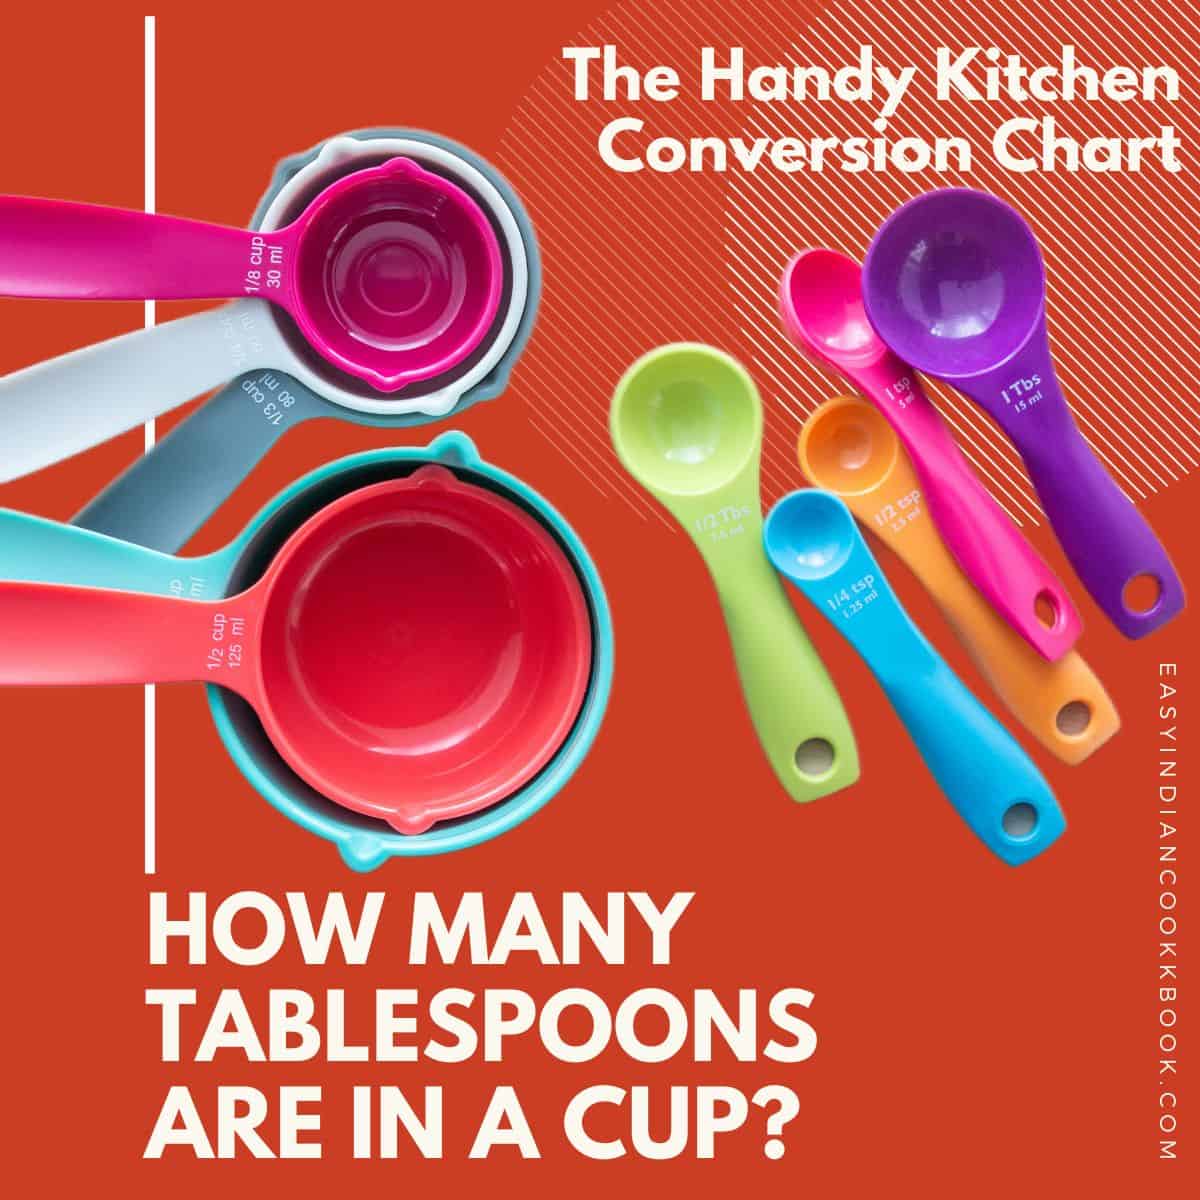 How many tablespoons are in a cup?